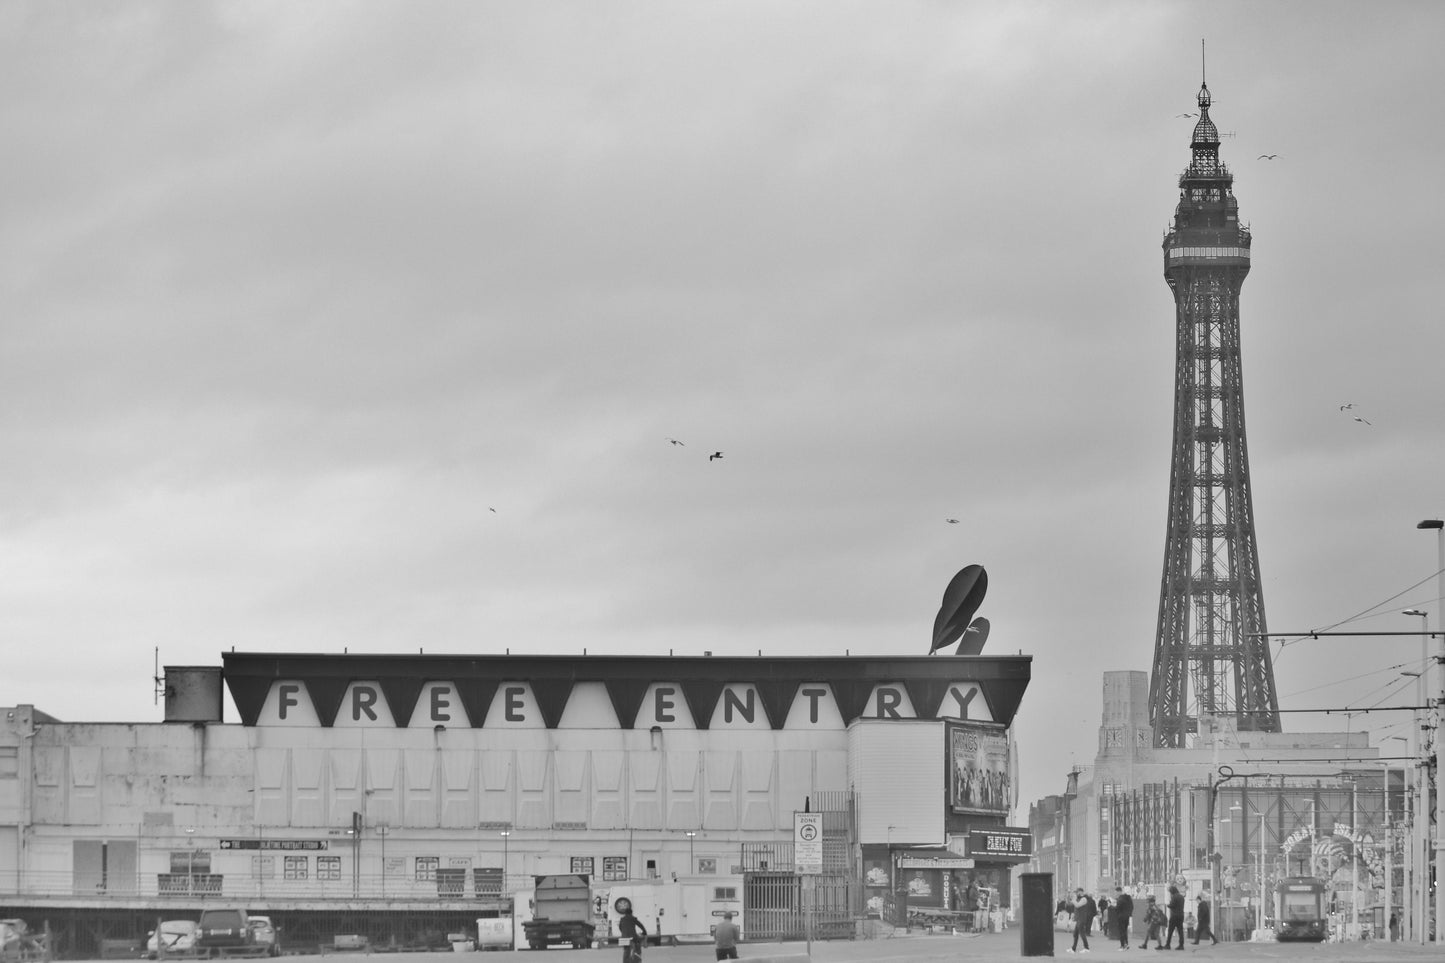 Blackpool Photography Print Blackpool Tower Central Pier Black And White Poster